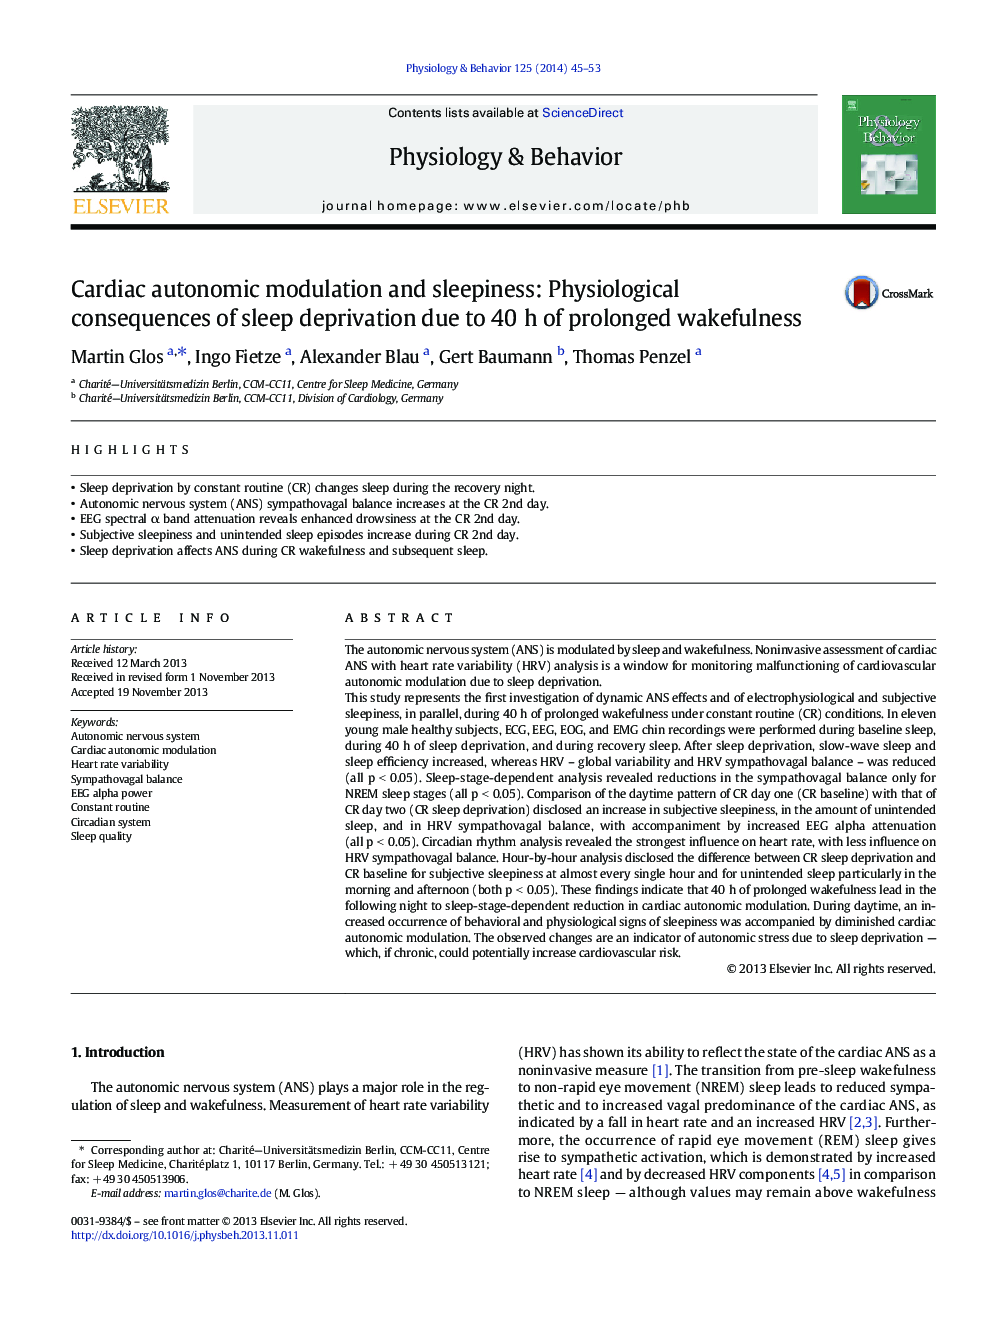 Cardiac autonomic modulation and sleepiness: Physiological consequences of sleep deprivation due to 40 h of prolonged wakefulness